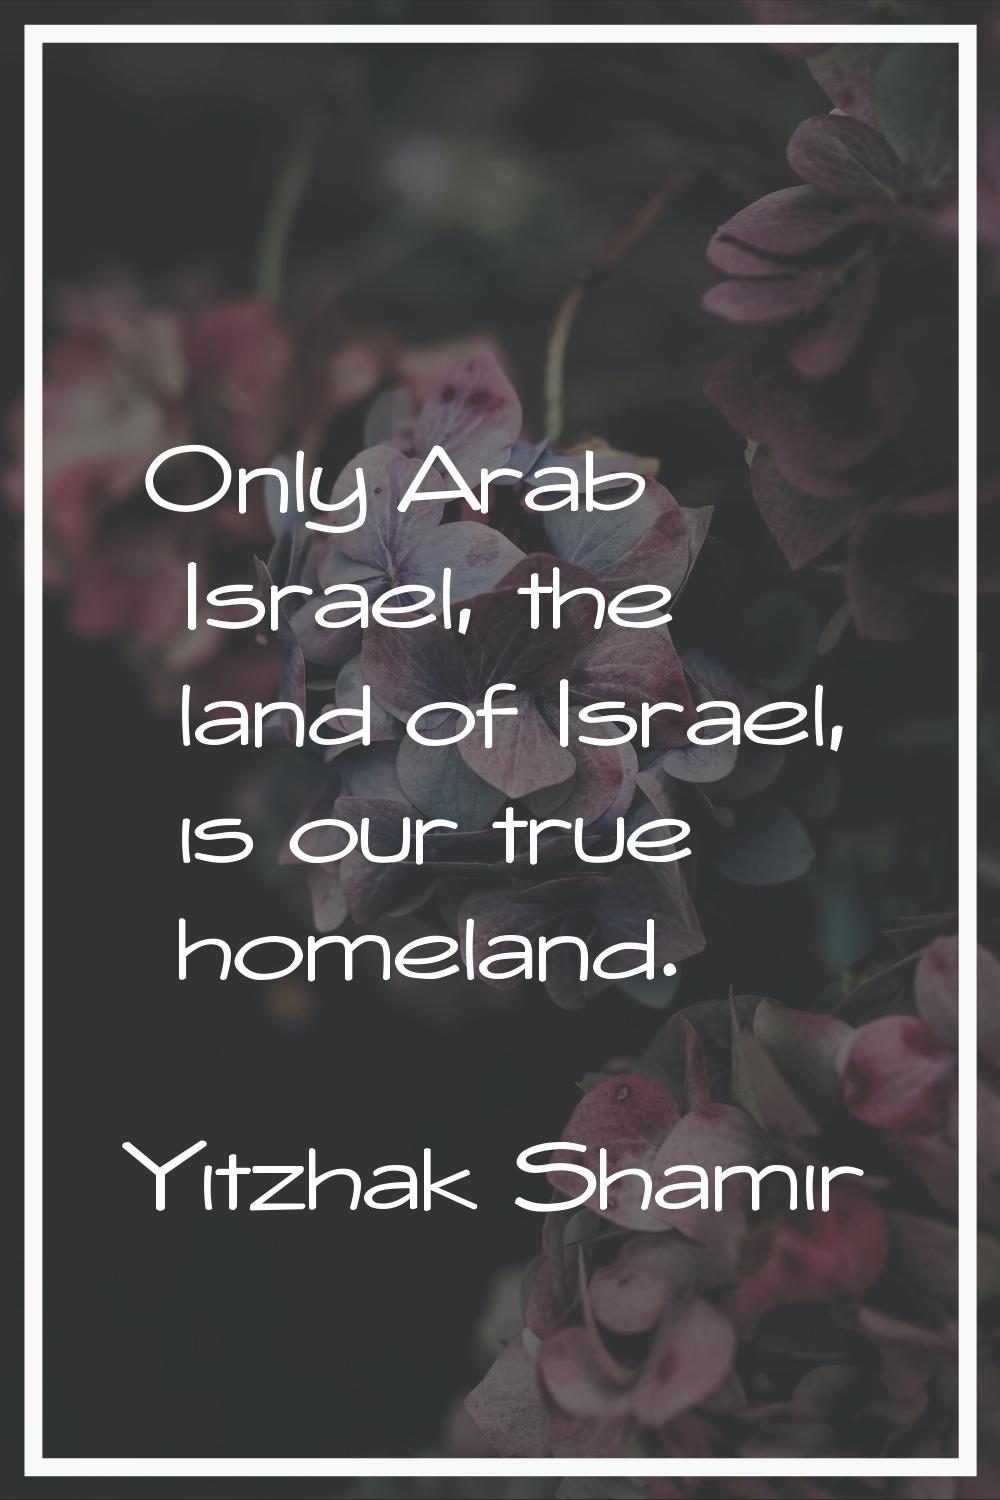 Only Arab Israel, the land of Israel, is our true homeland.